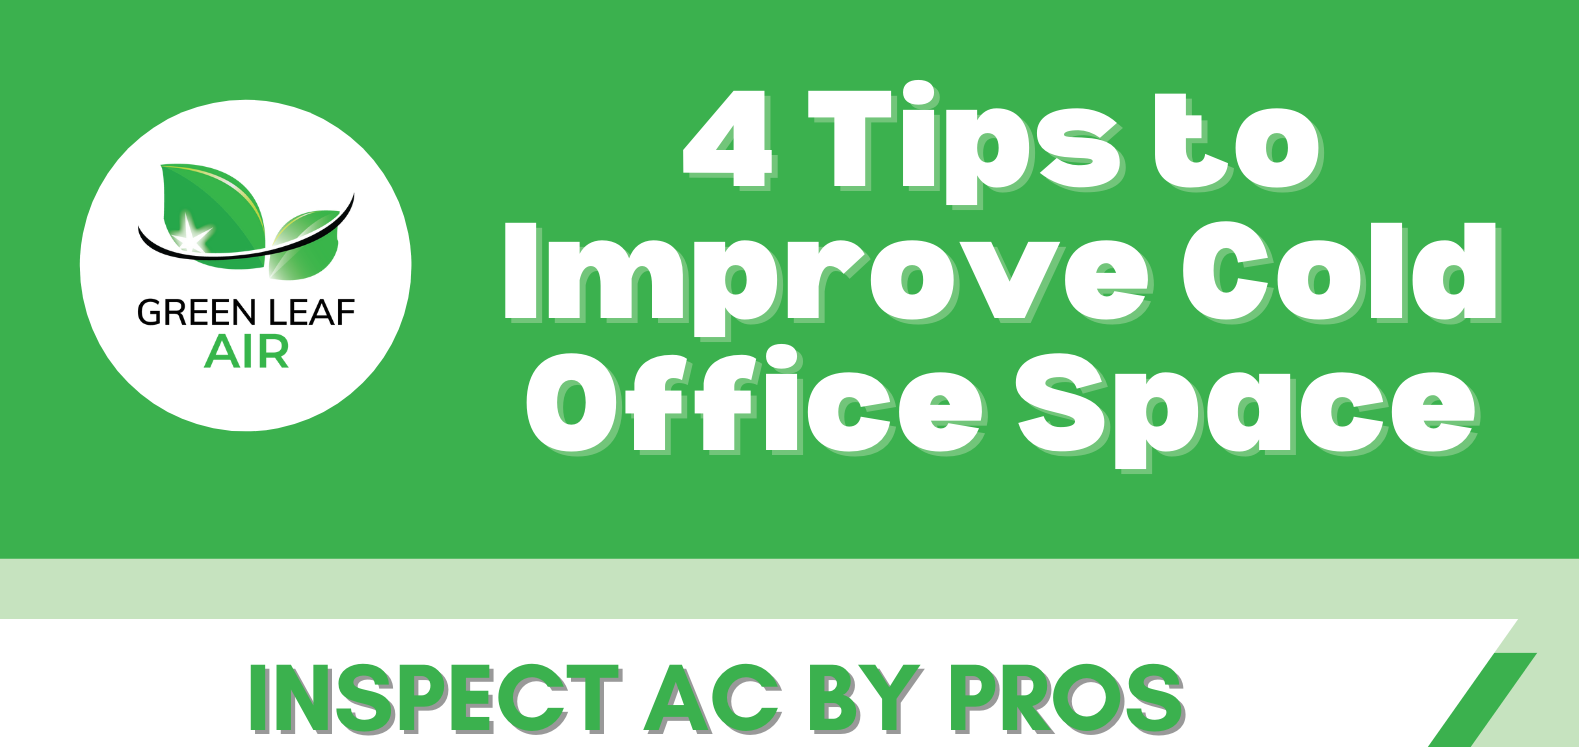 4 Tips to Improve Cold Office Space